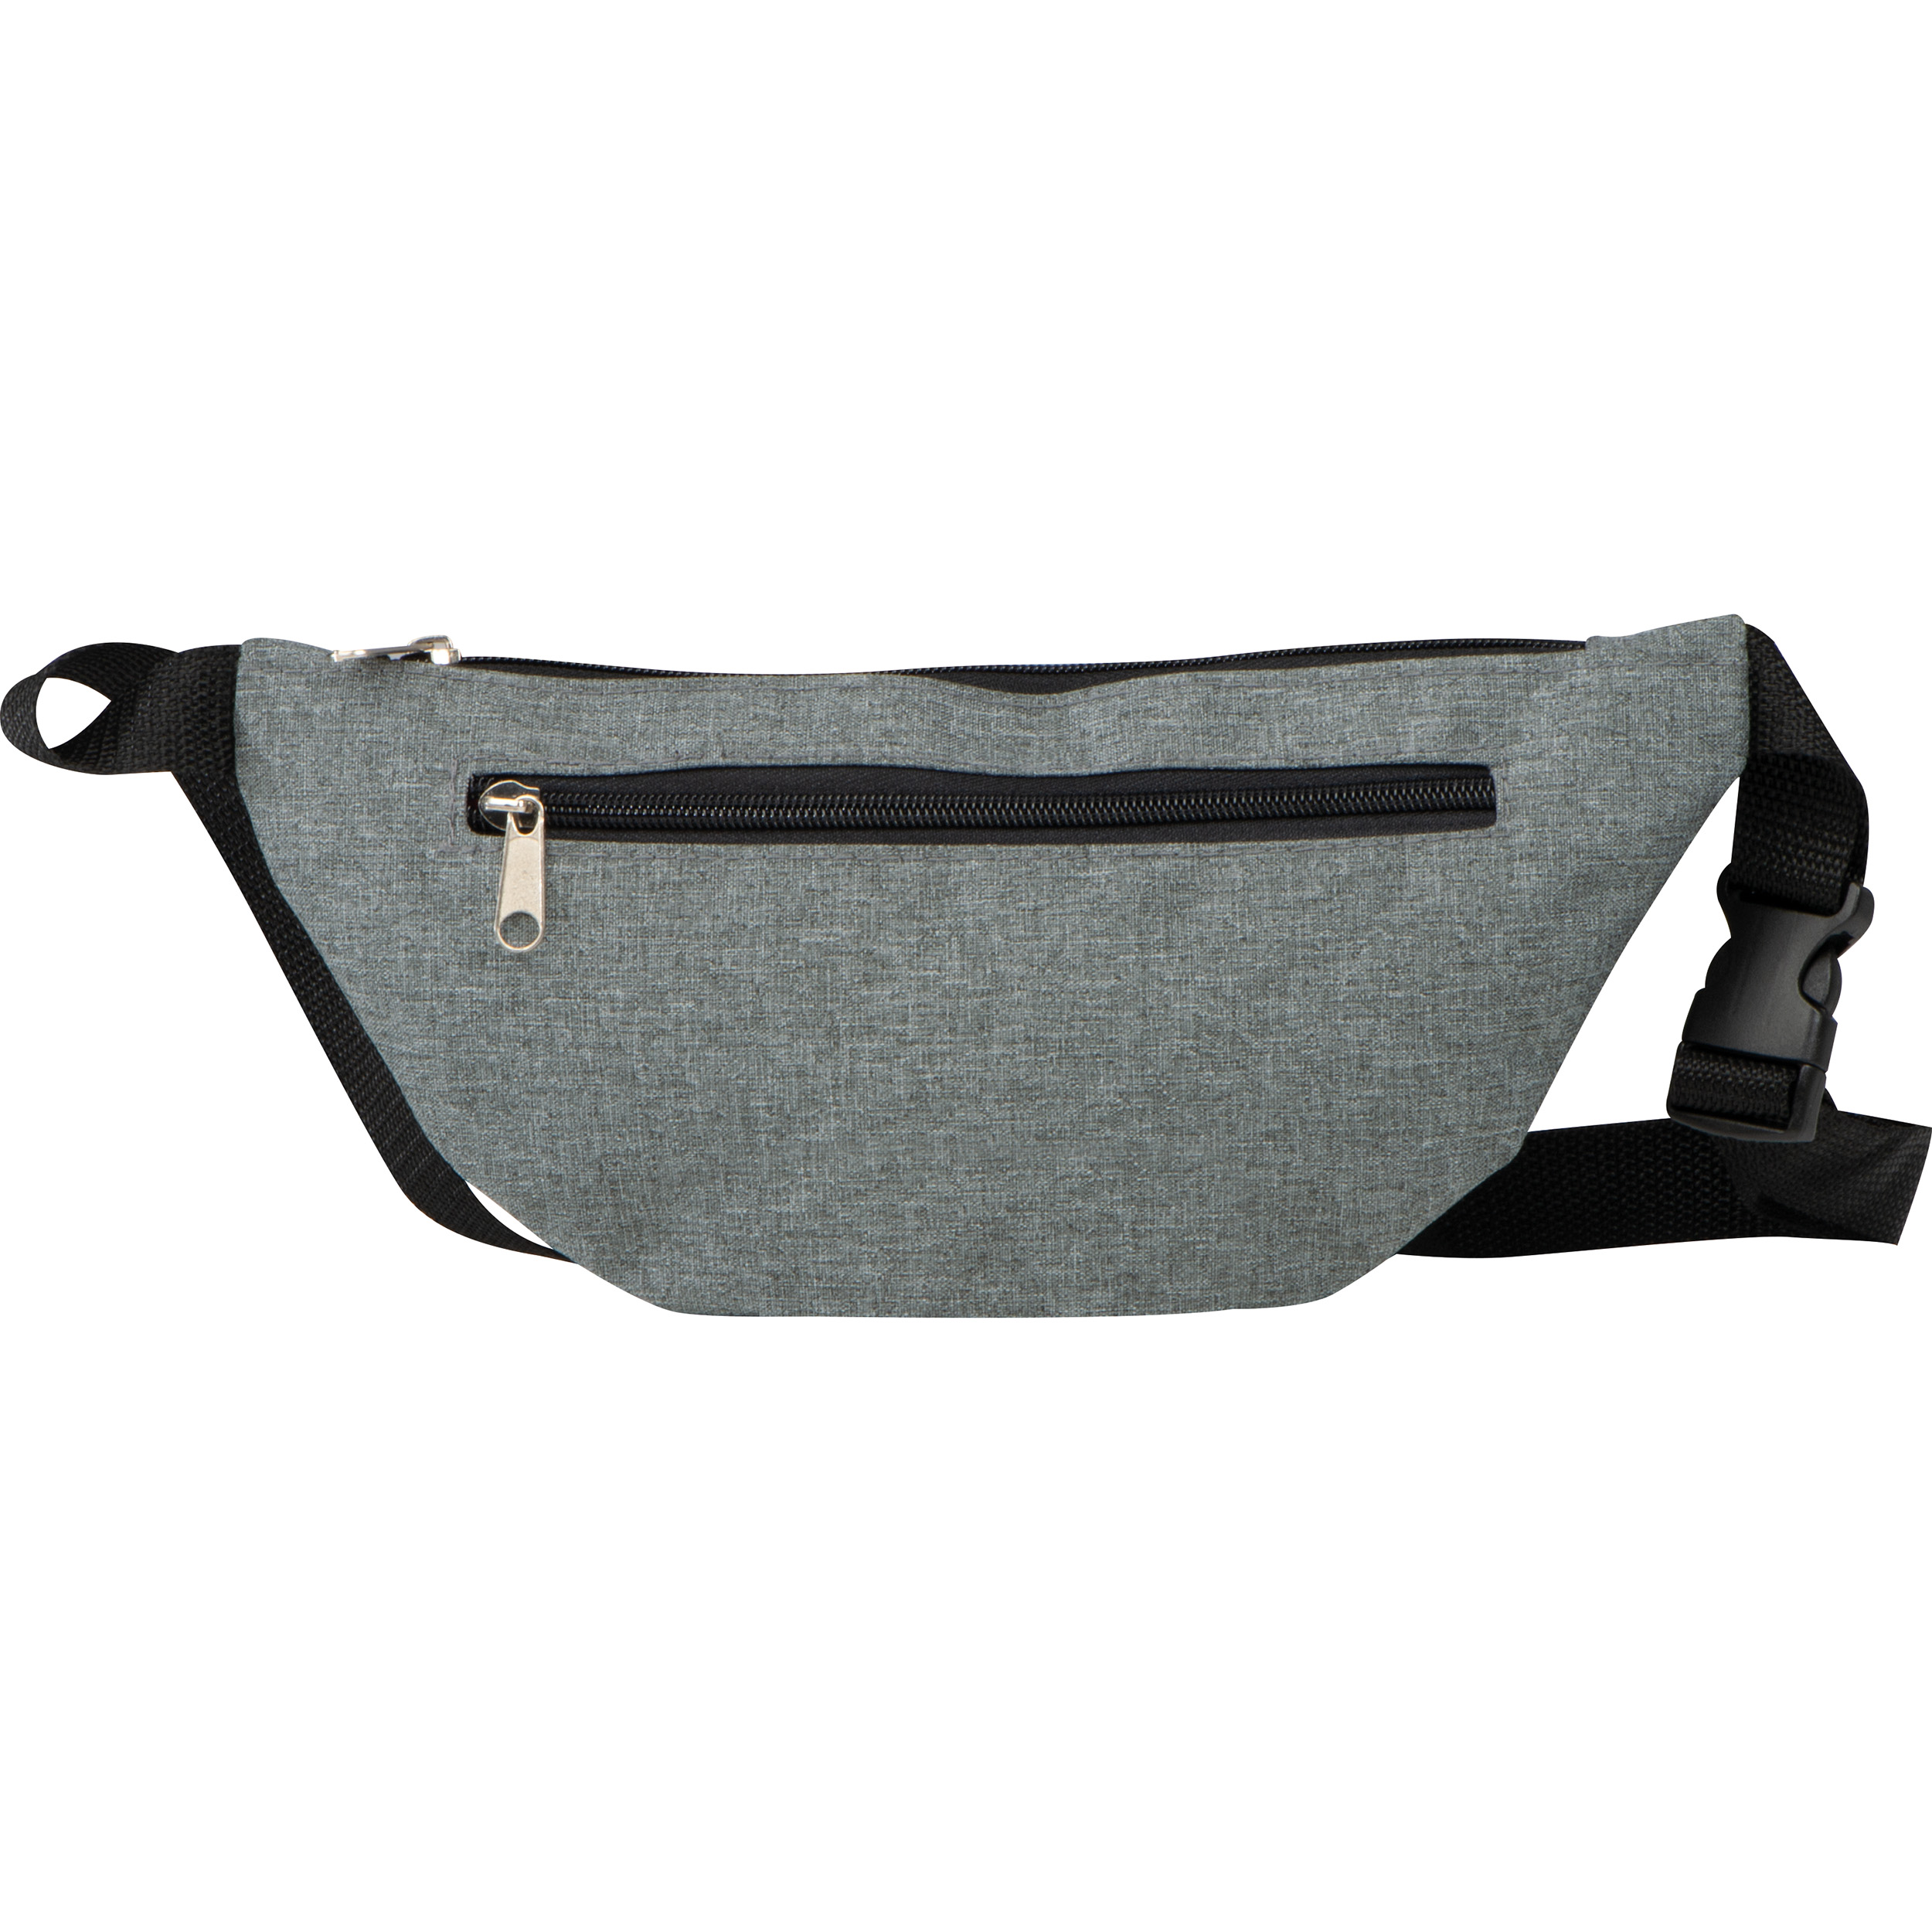 Belt pouch in polyester